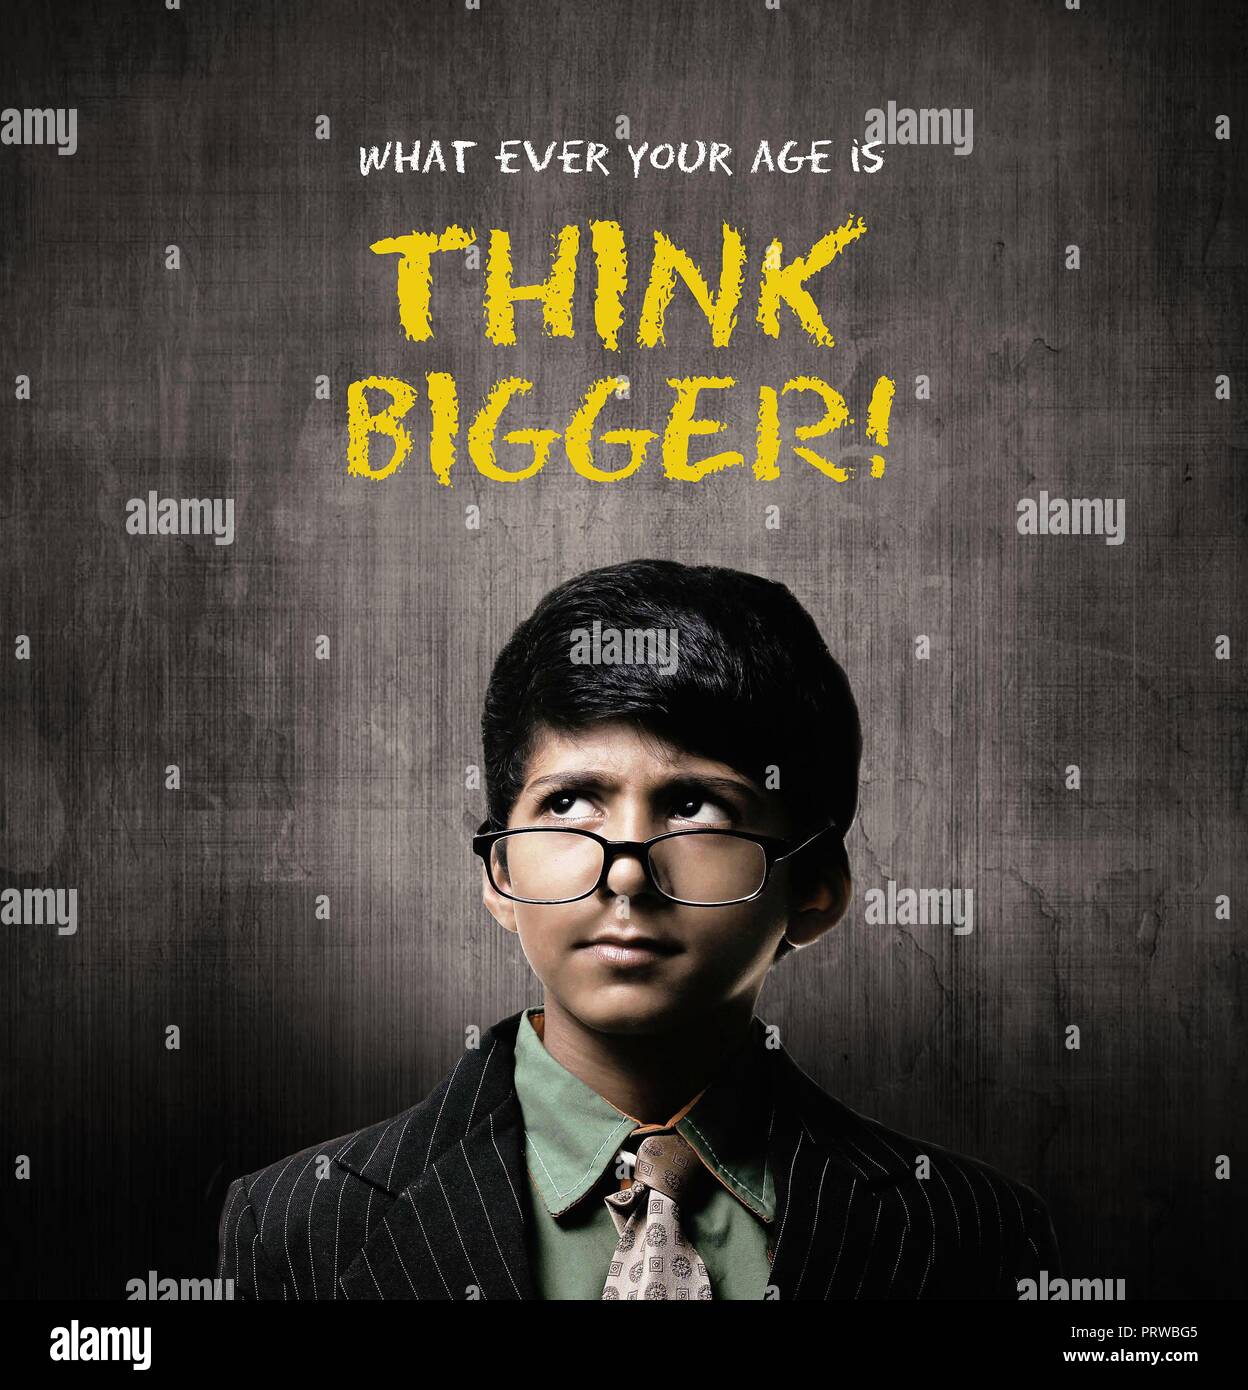 Cute Intelligent Little Boy Wearing Glasses On Nose, Thinking While Standing Before A Chalkboard, Think Bogger Written On Chalkboard Stock Photo